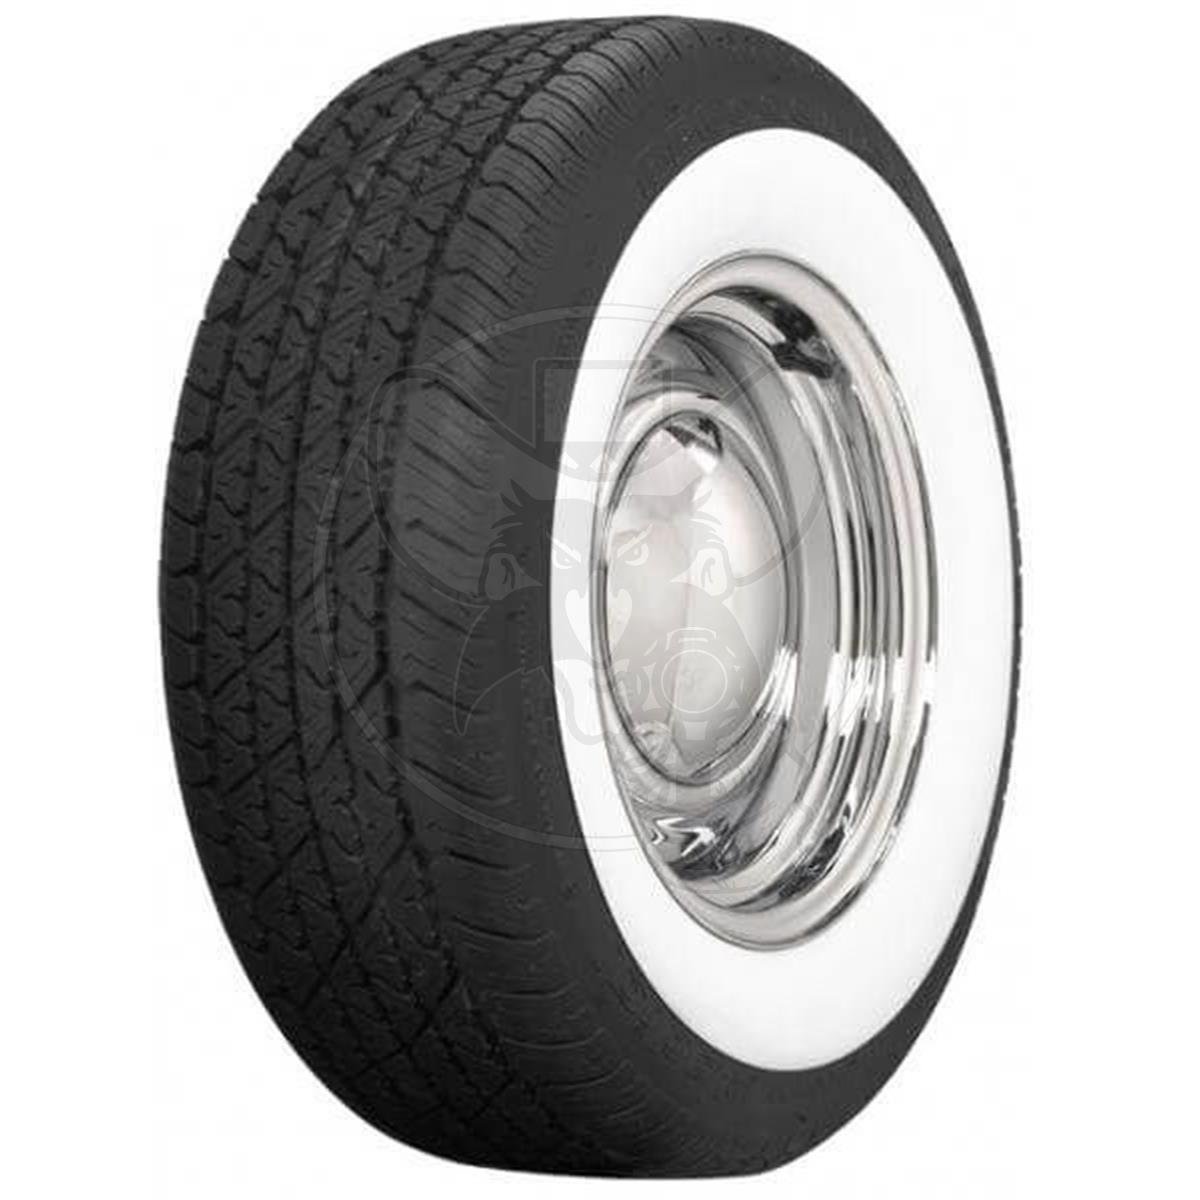 BF GOODRICH SILVERTON RADIAL 205/75 R15 WITH 2-3/8" WHITEWALL